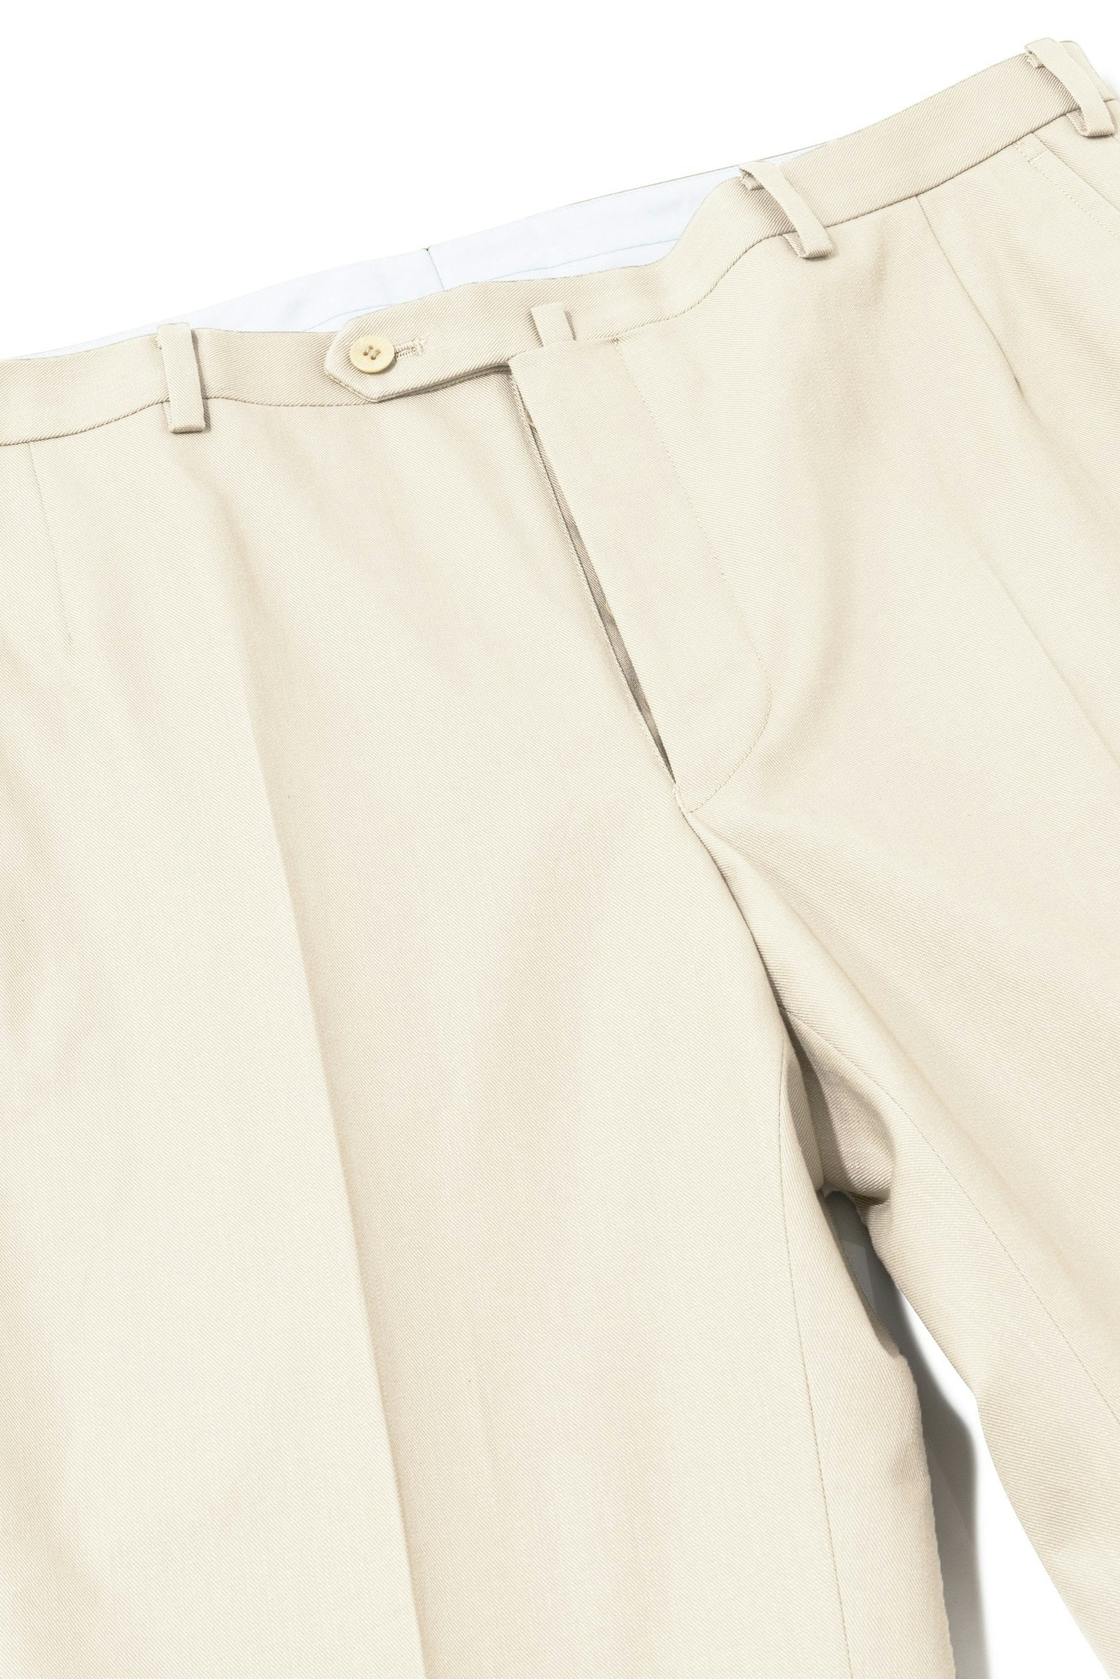 The Armoury by Osaku Stone Cotton Flat-front AO Trousers